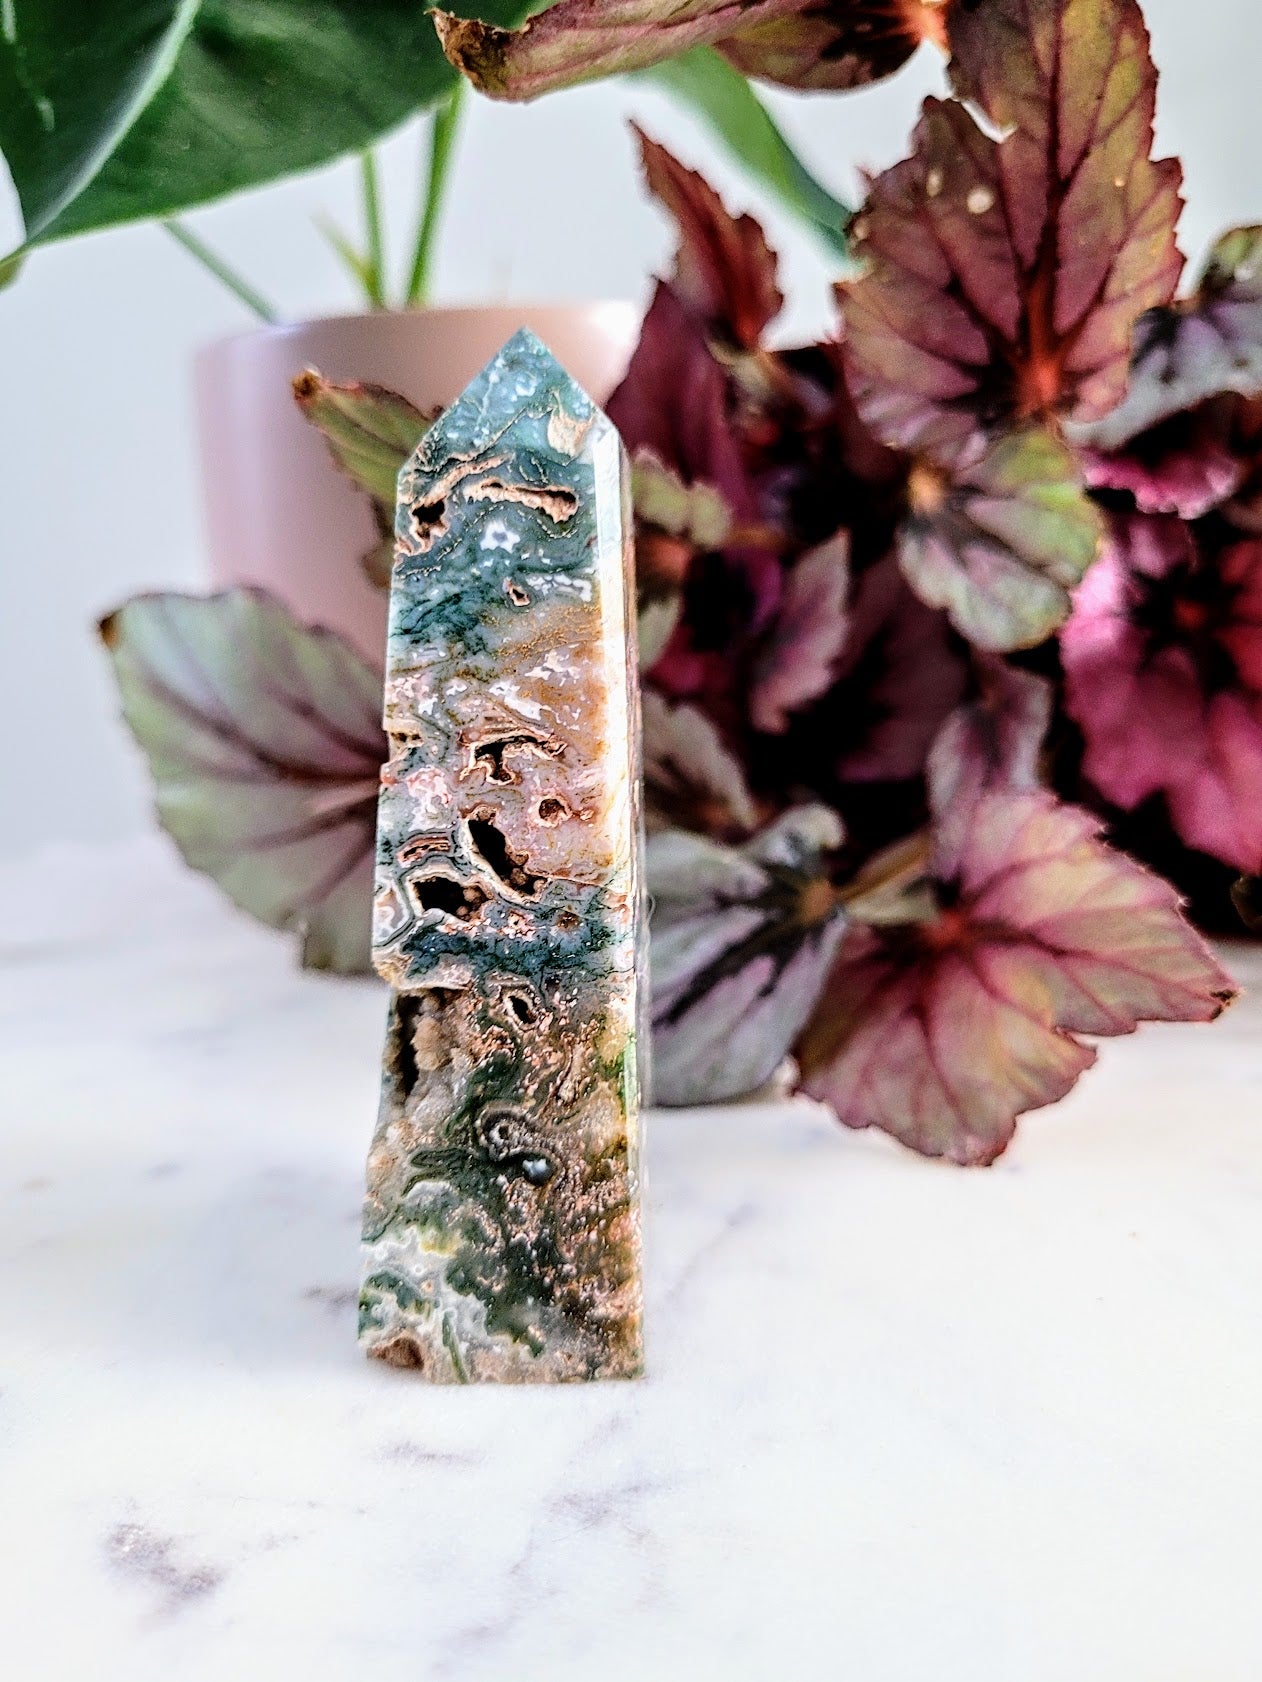 Druzy Pink Moss Agate